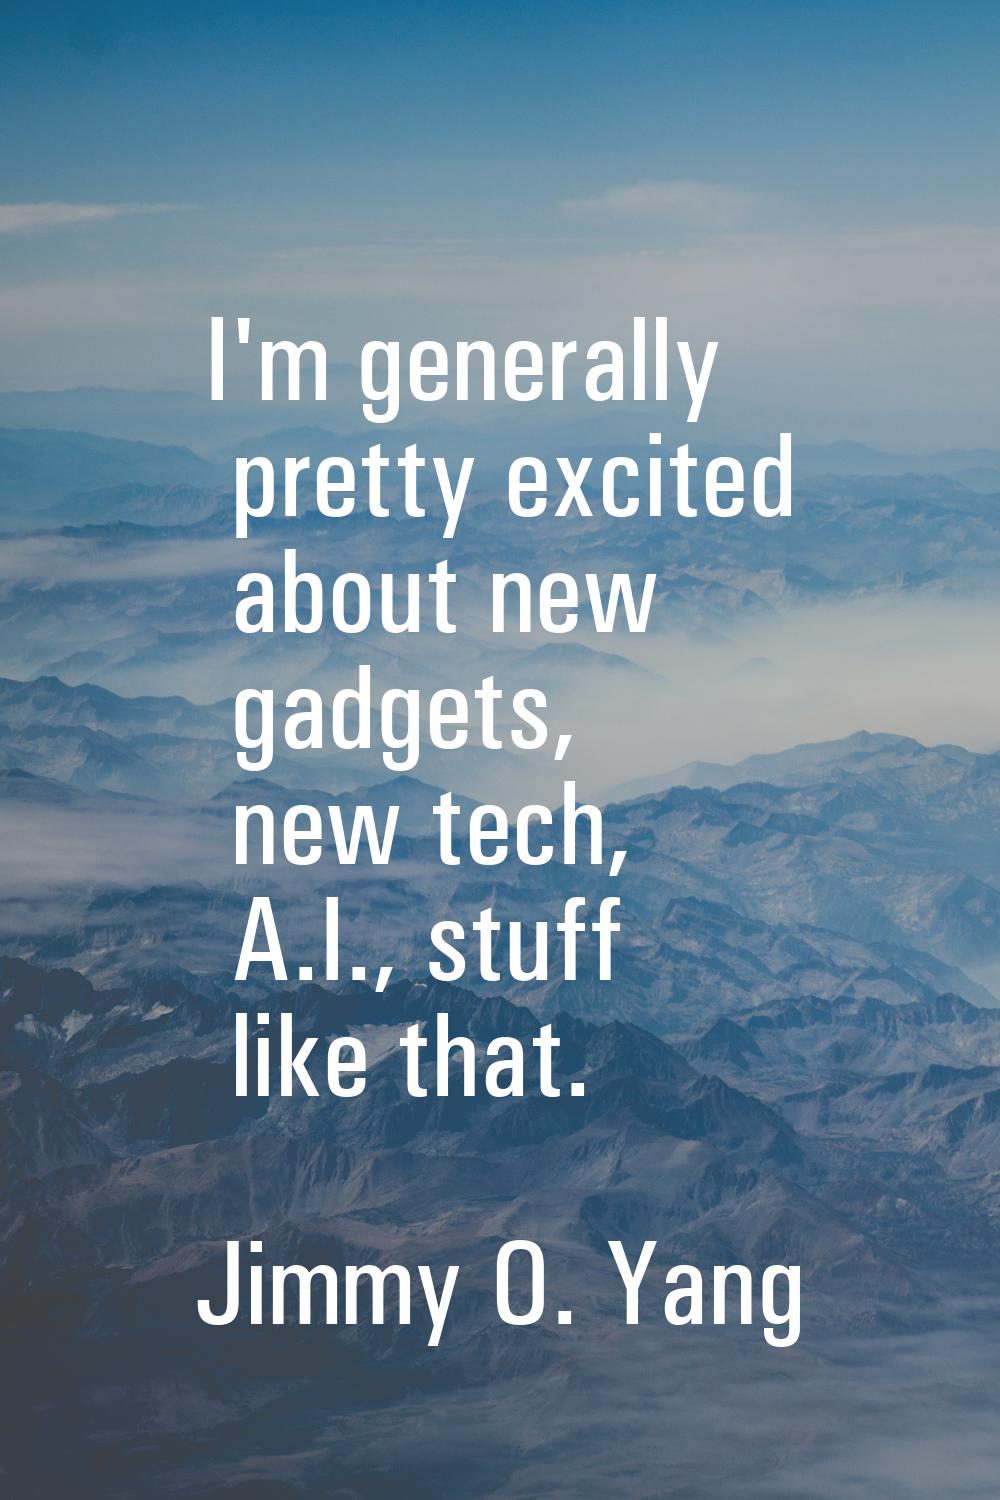 I'm generally pretty excited about new gadgets, new tech, A.I., stuff like that.